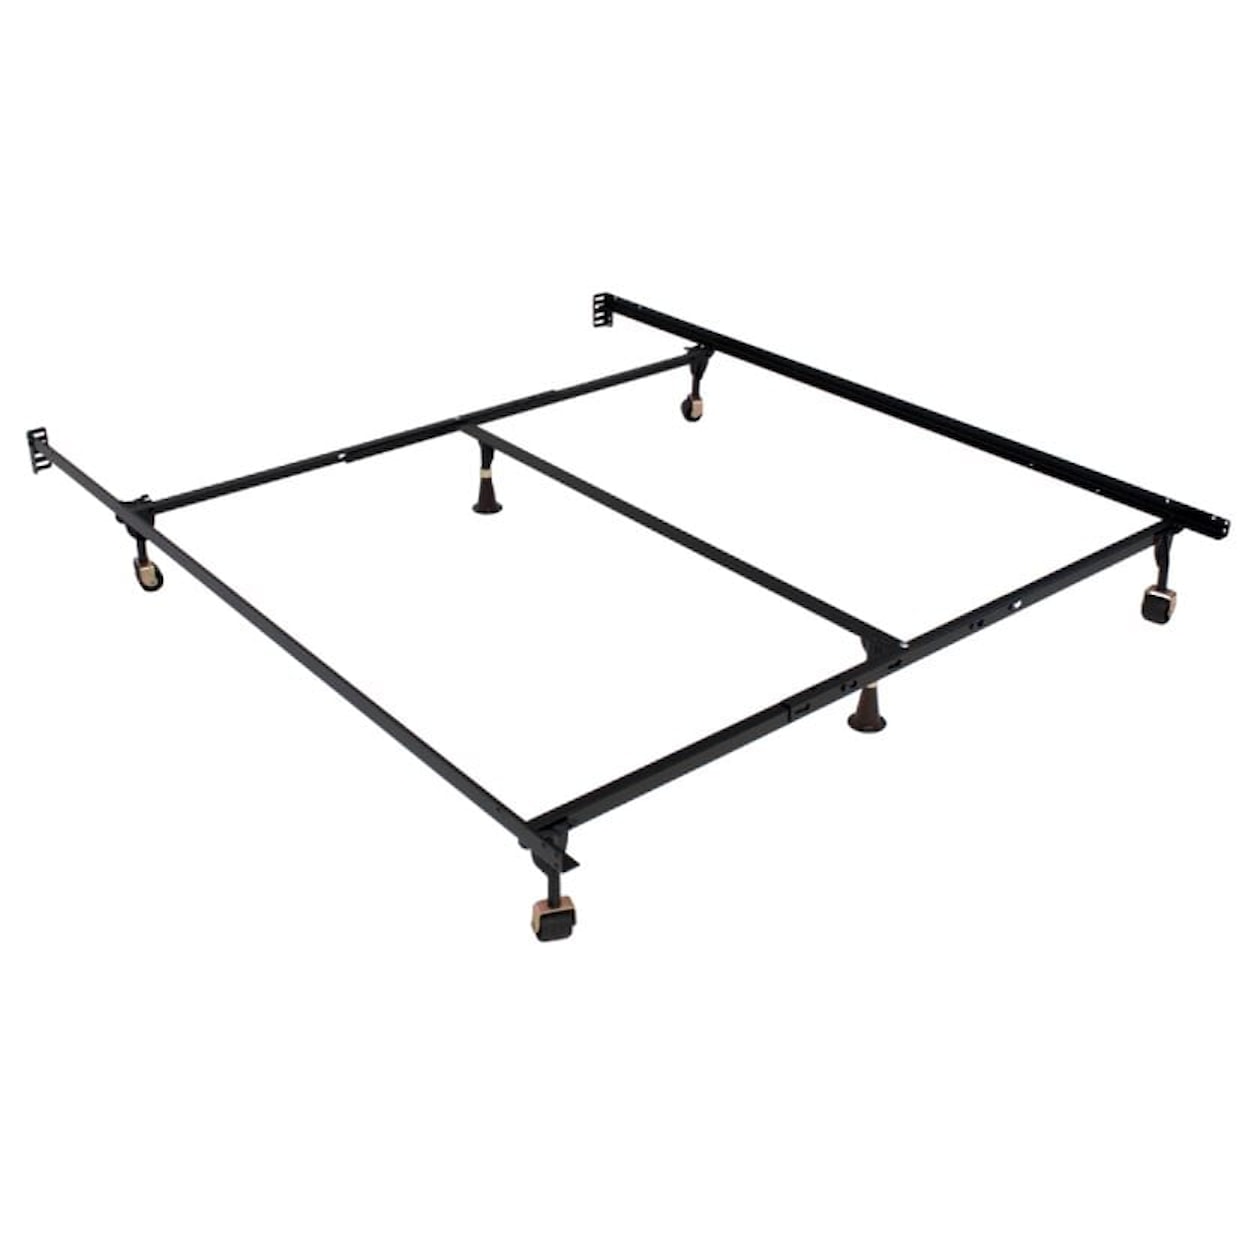 Hollywood Bed Frame Company Promo Twin-Full Bed Frame